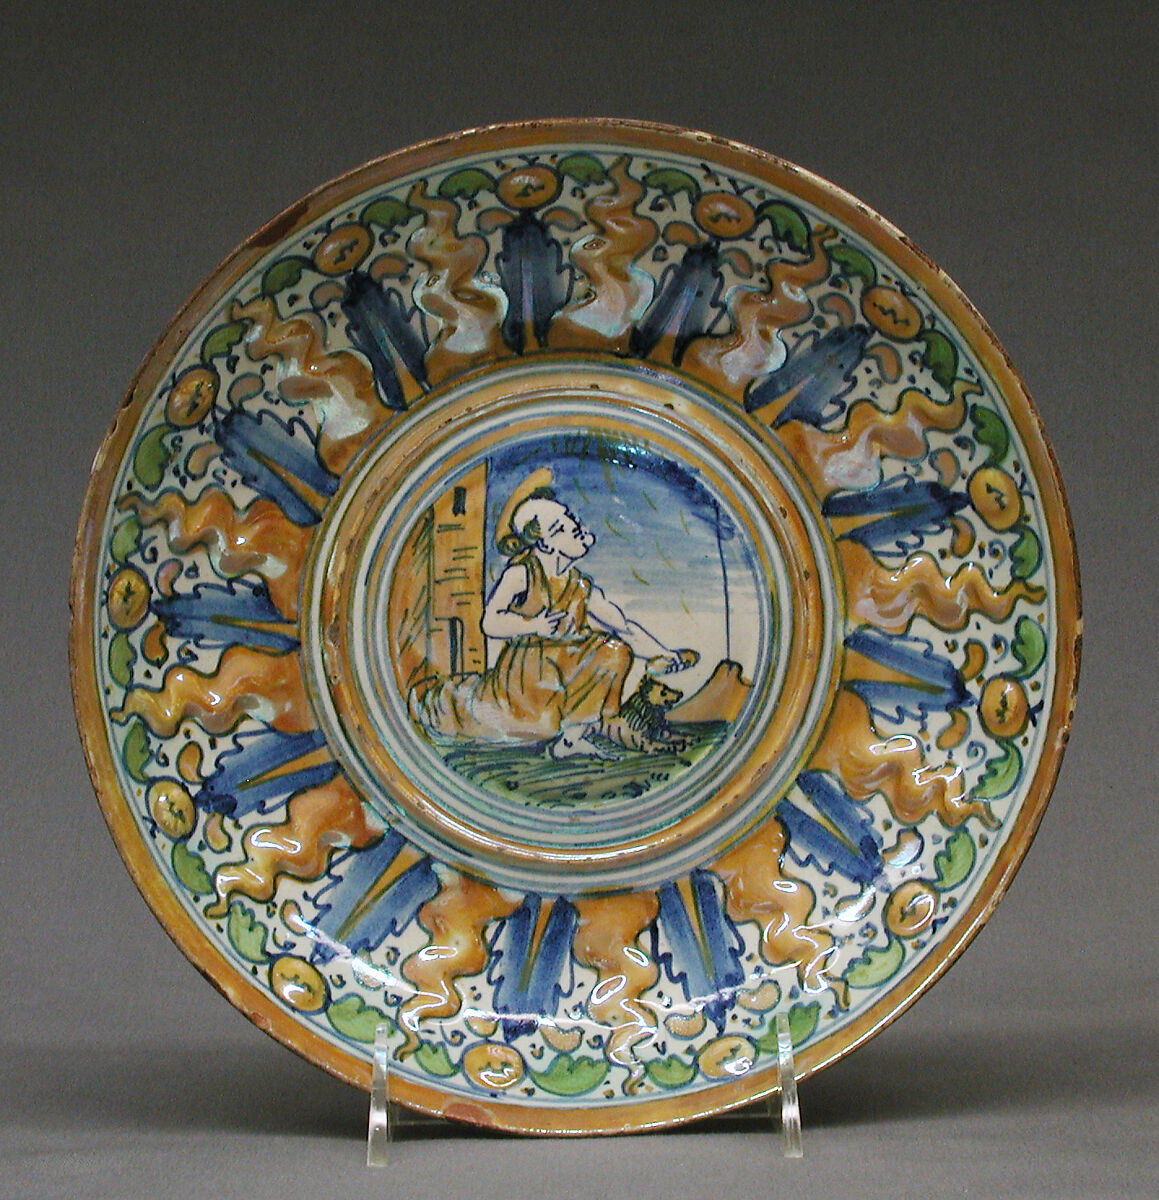 Bowl with St. Jerome and lion in a landscape, Maiolica (tin-glazed earthenware), lustered, Italian, Gubbio 